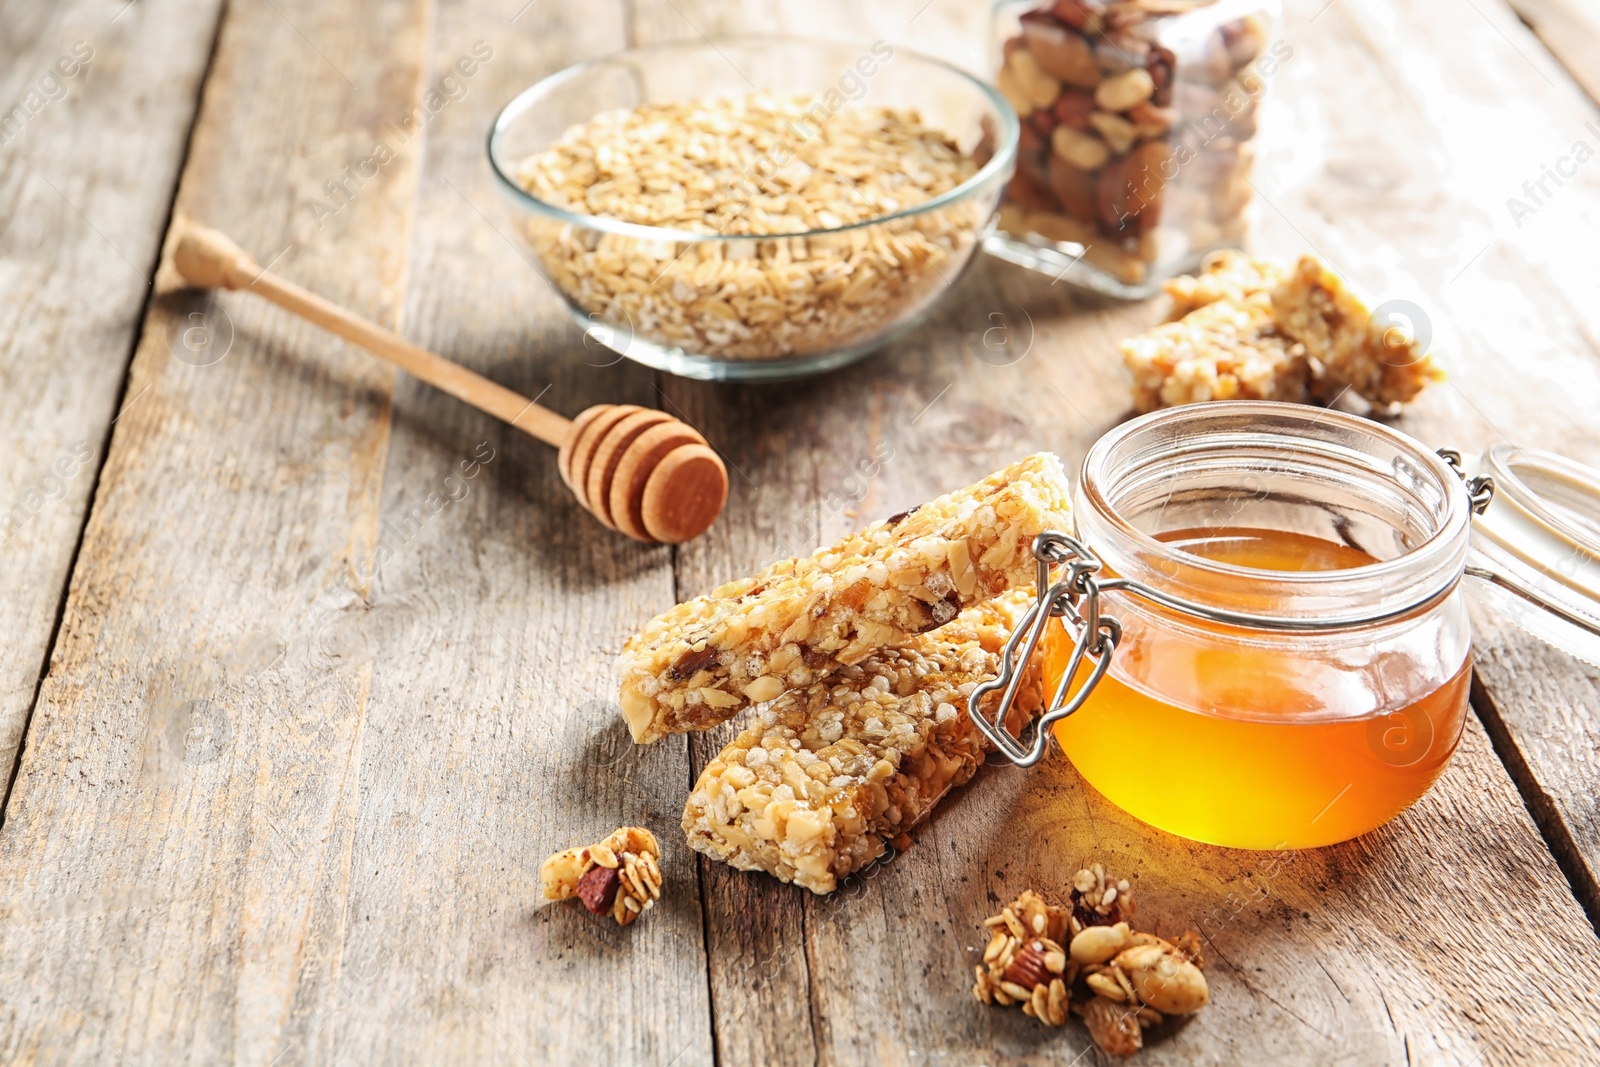 Photo of Homemade grain cereal bars and honey on wooden table. Healthy snack